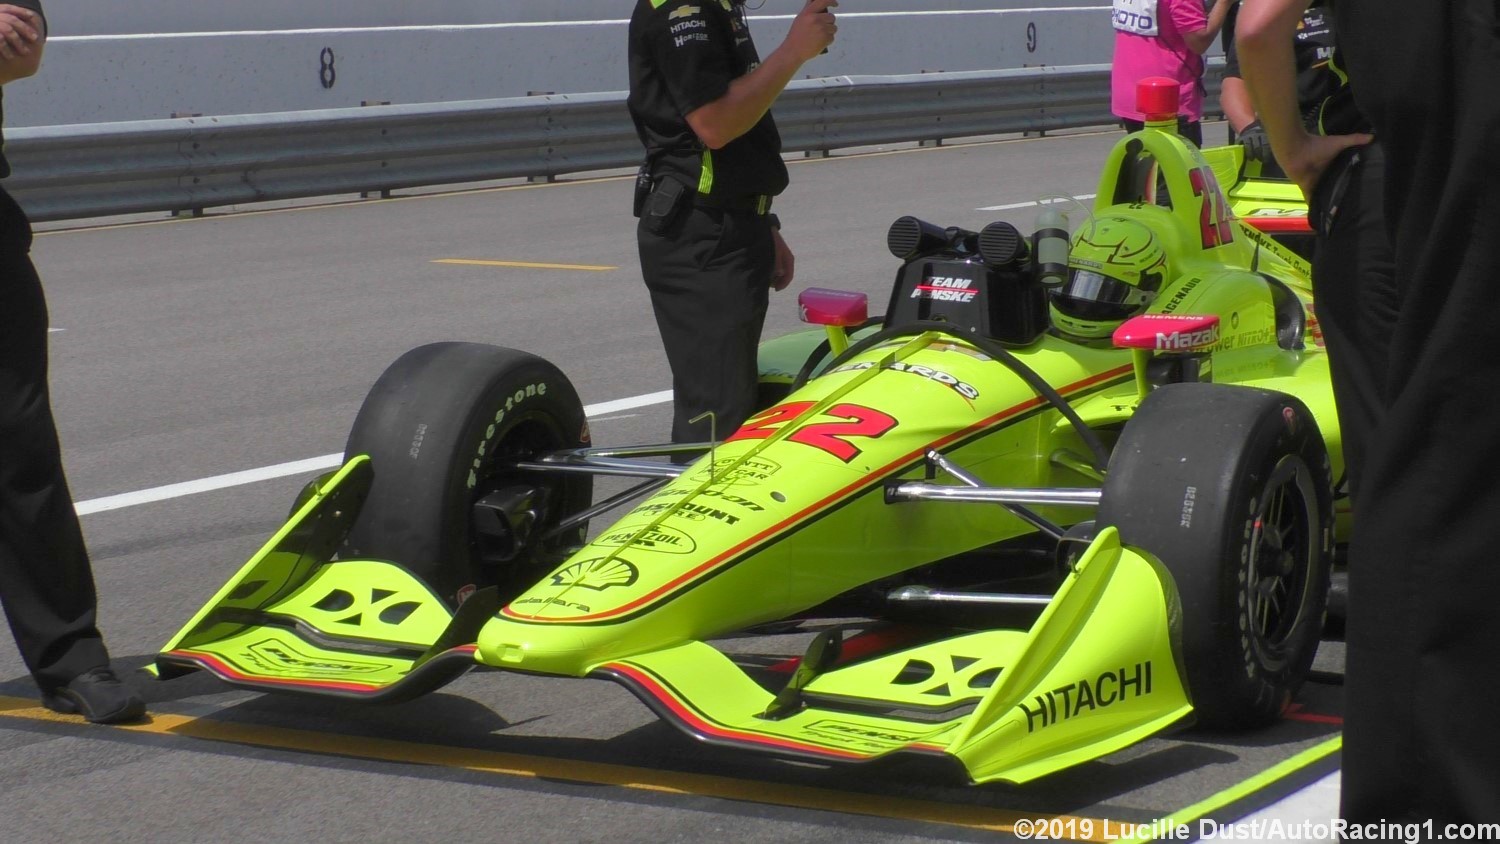 Pagenaud has now moved ahead of Rossi for 2nd in points